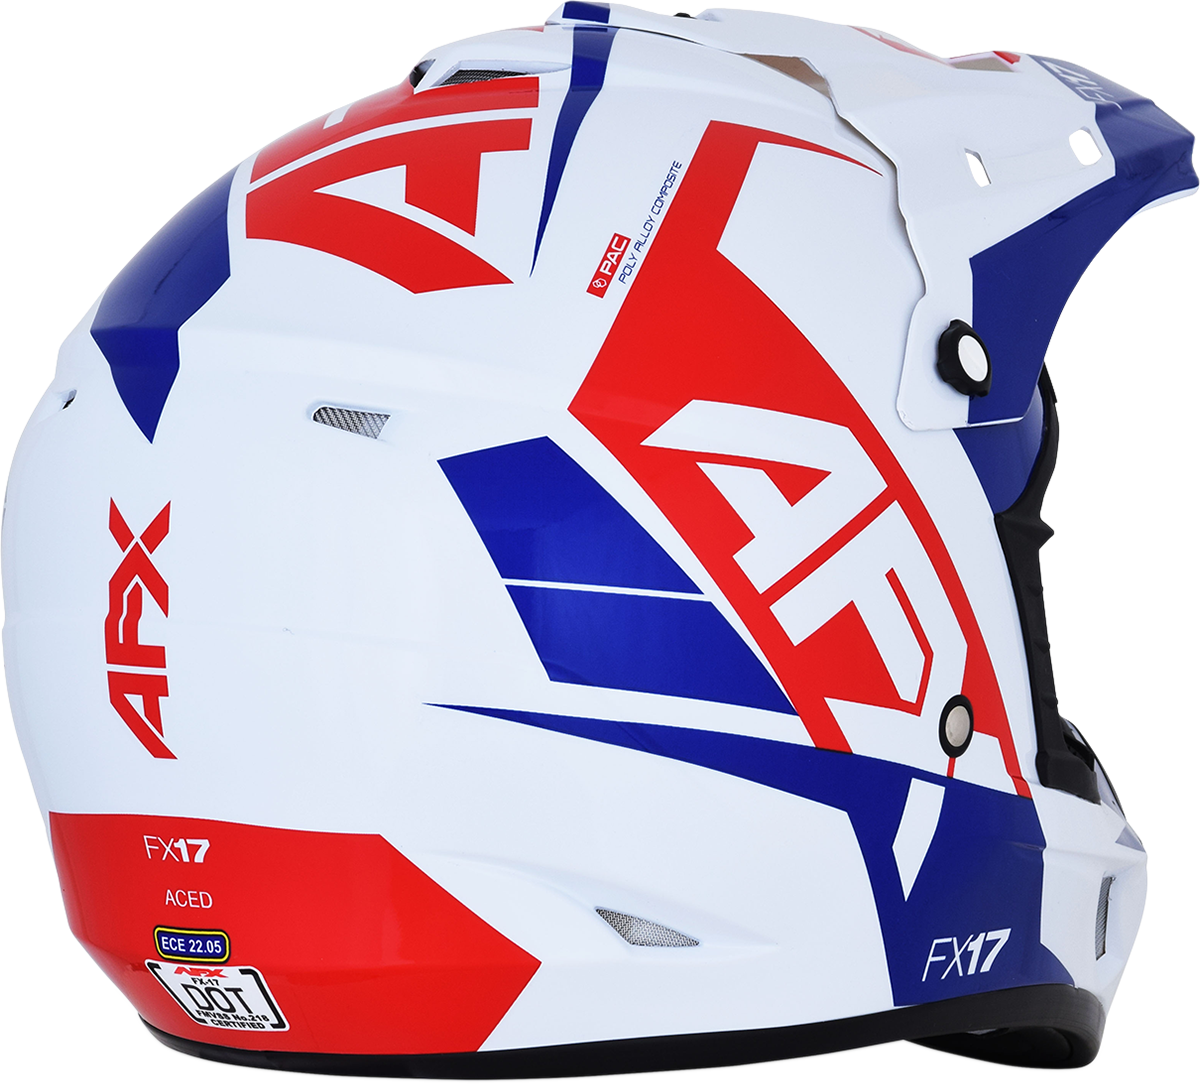 AFX FX-17 Helmet - Aced - Red/White/Blue - Small 0110-6479